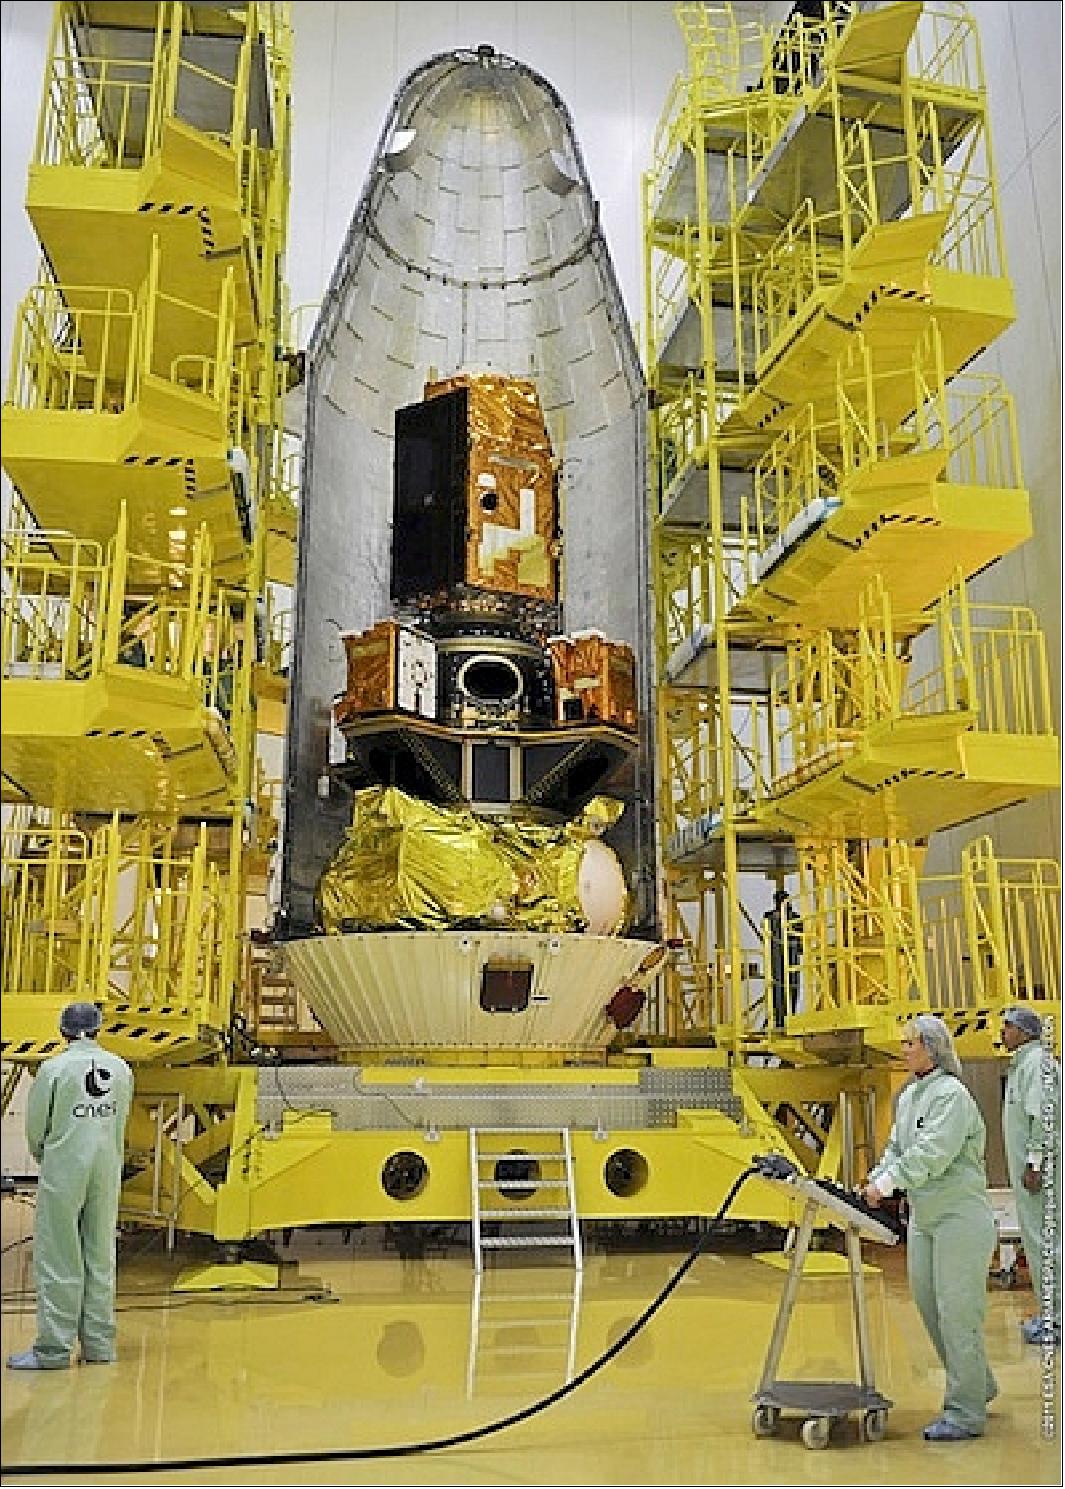 Figure 8: Photo of the flight payloads in the integration facility in the Kourou Spaceport (image credit: Arianespace)